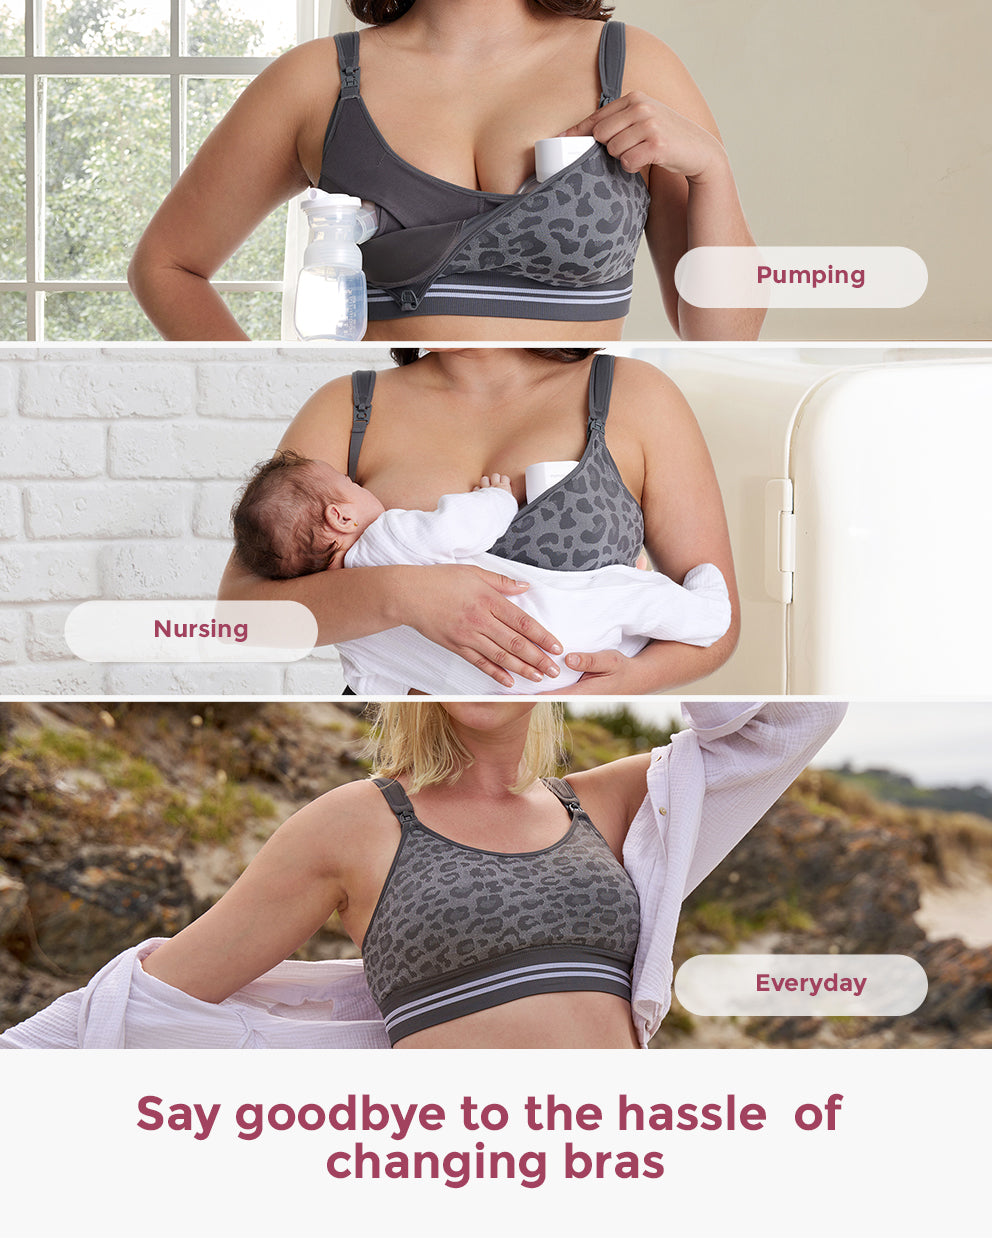  Momcozy 4-in-1 Pumping Bra Hands Free, Fixed Padding